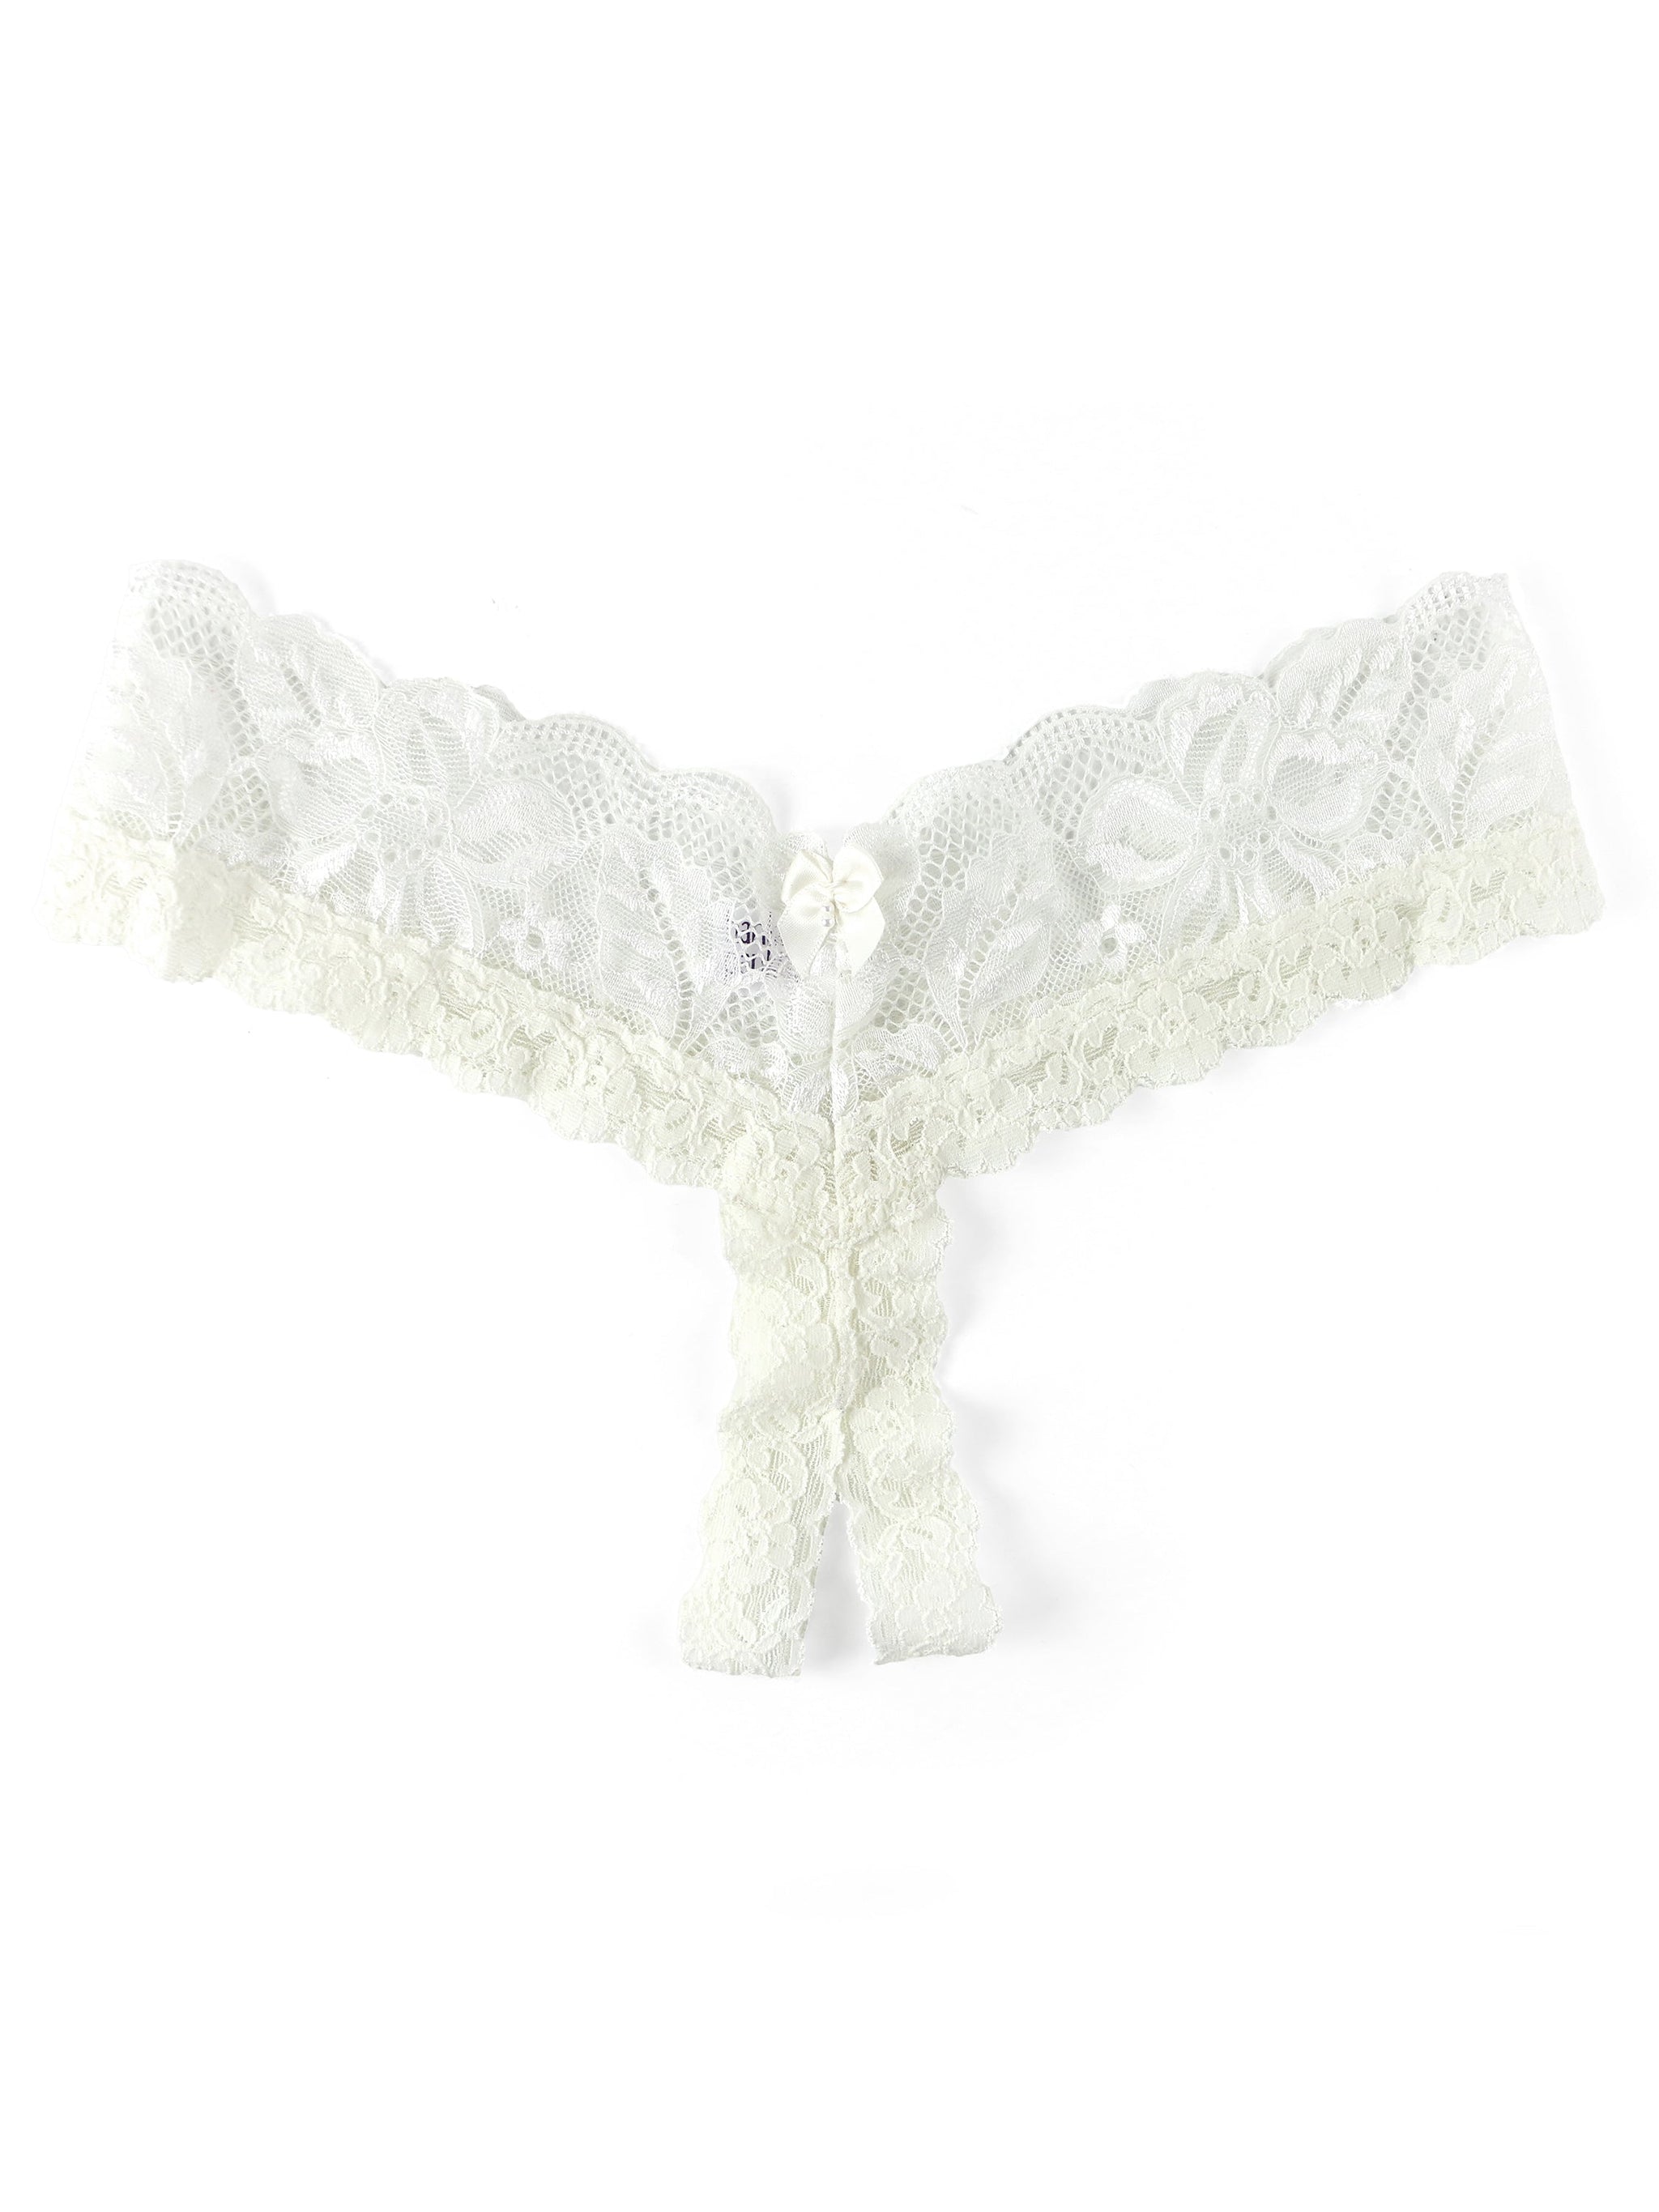 Nude Illusion Crotchless G-String